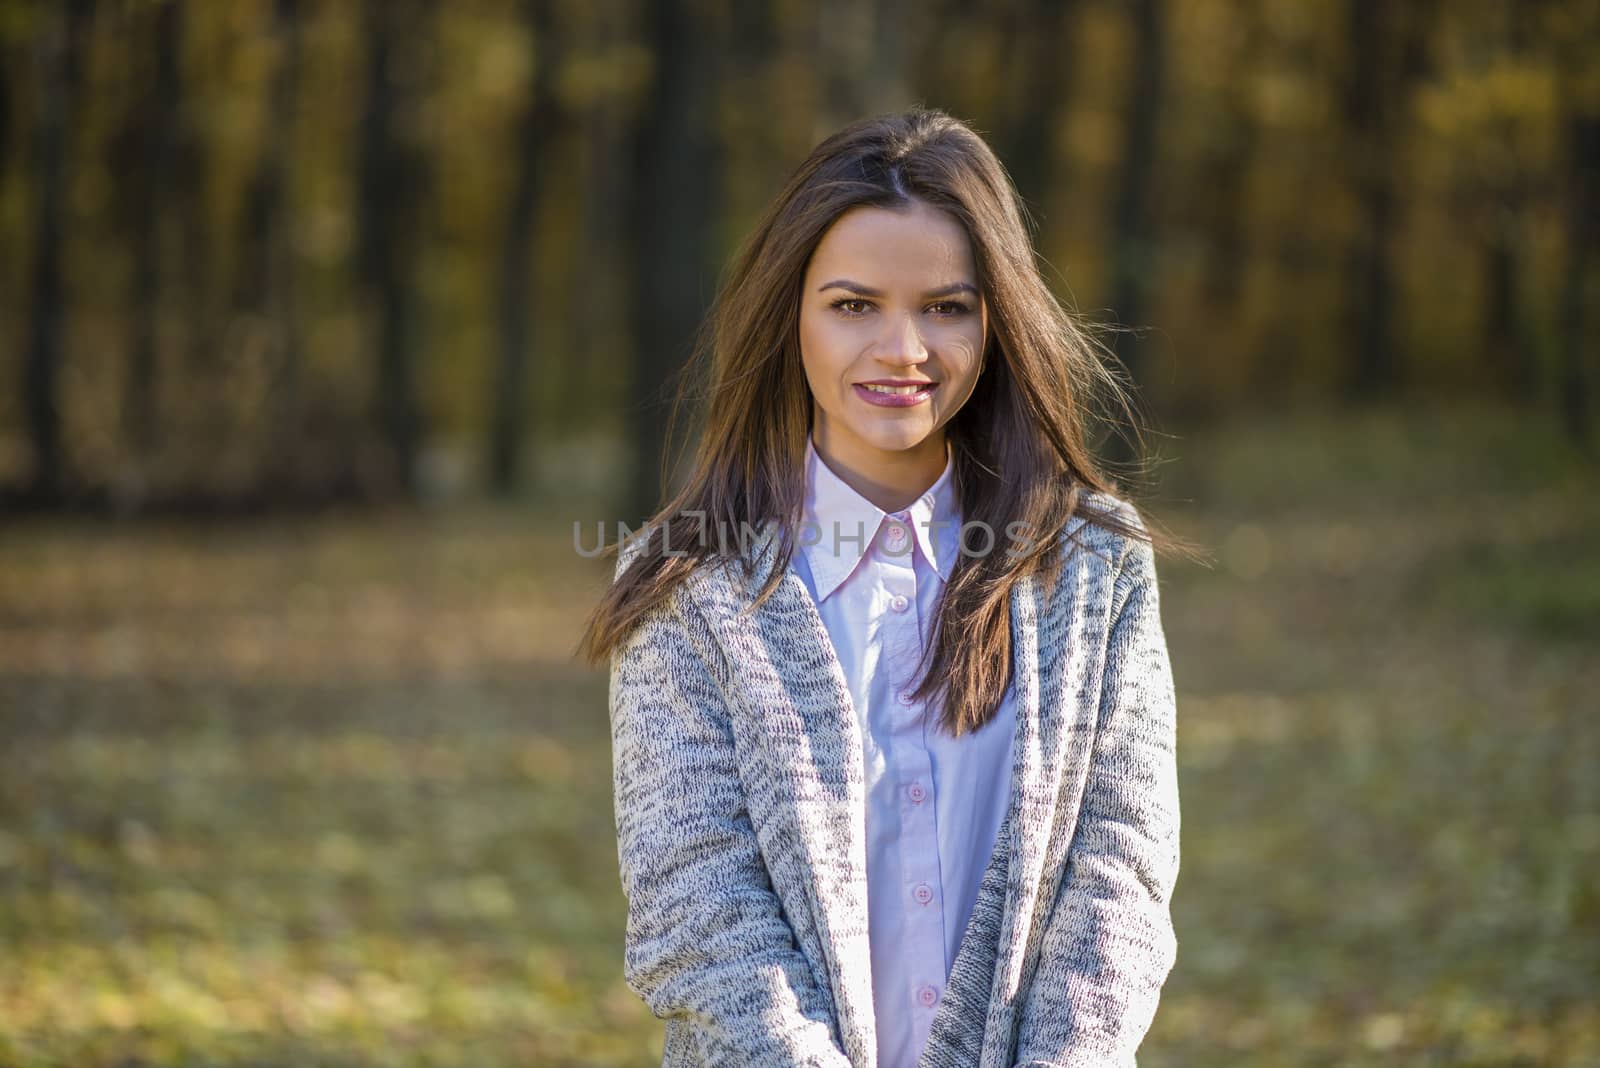 Smiling girl is posing in a autumn forest in a warm knitted blouse. Action takes place in an autumn afternoon.